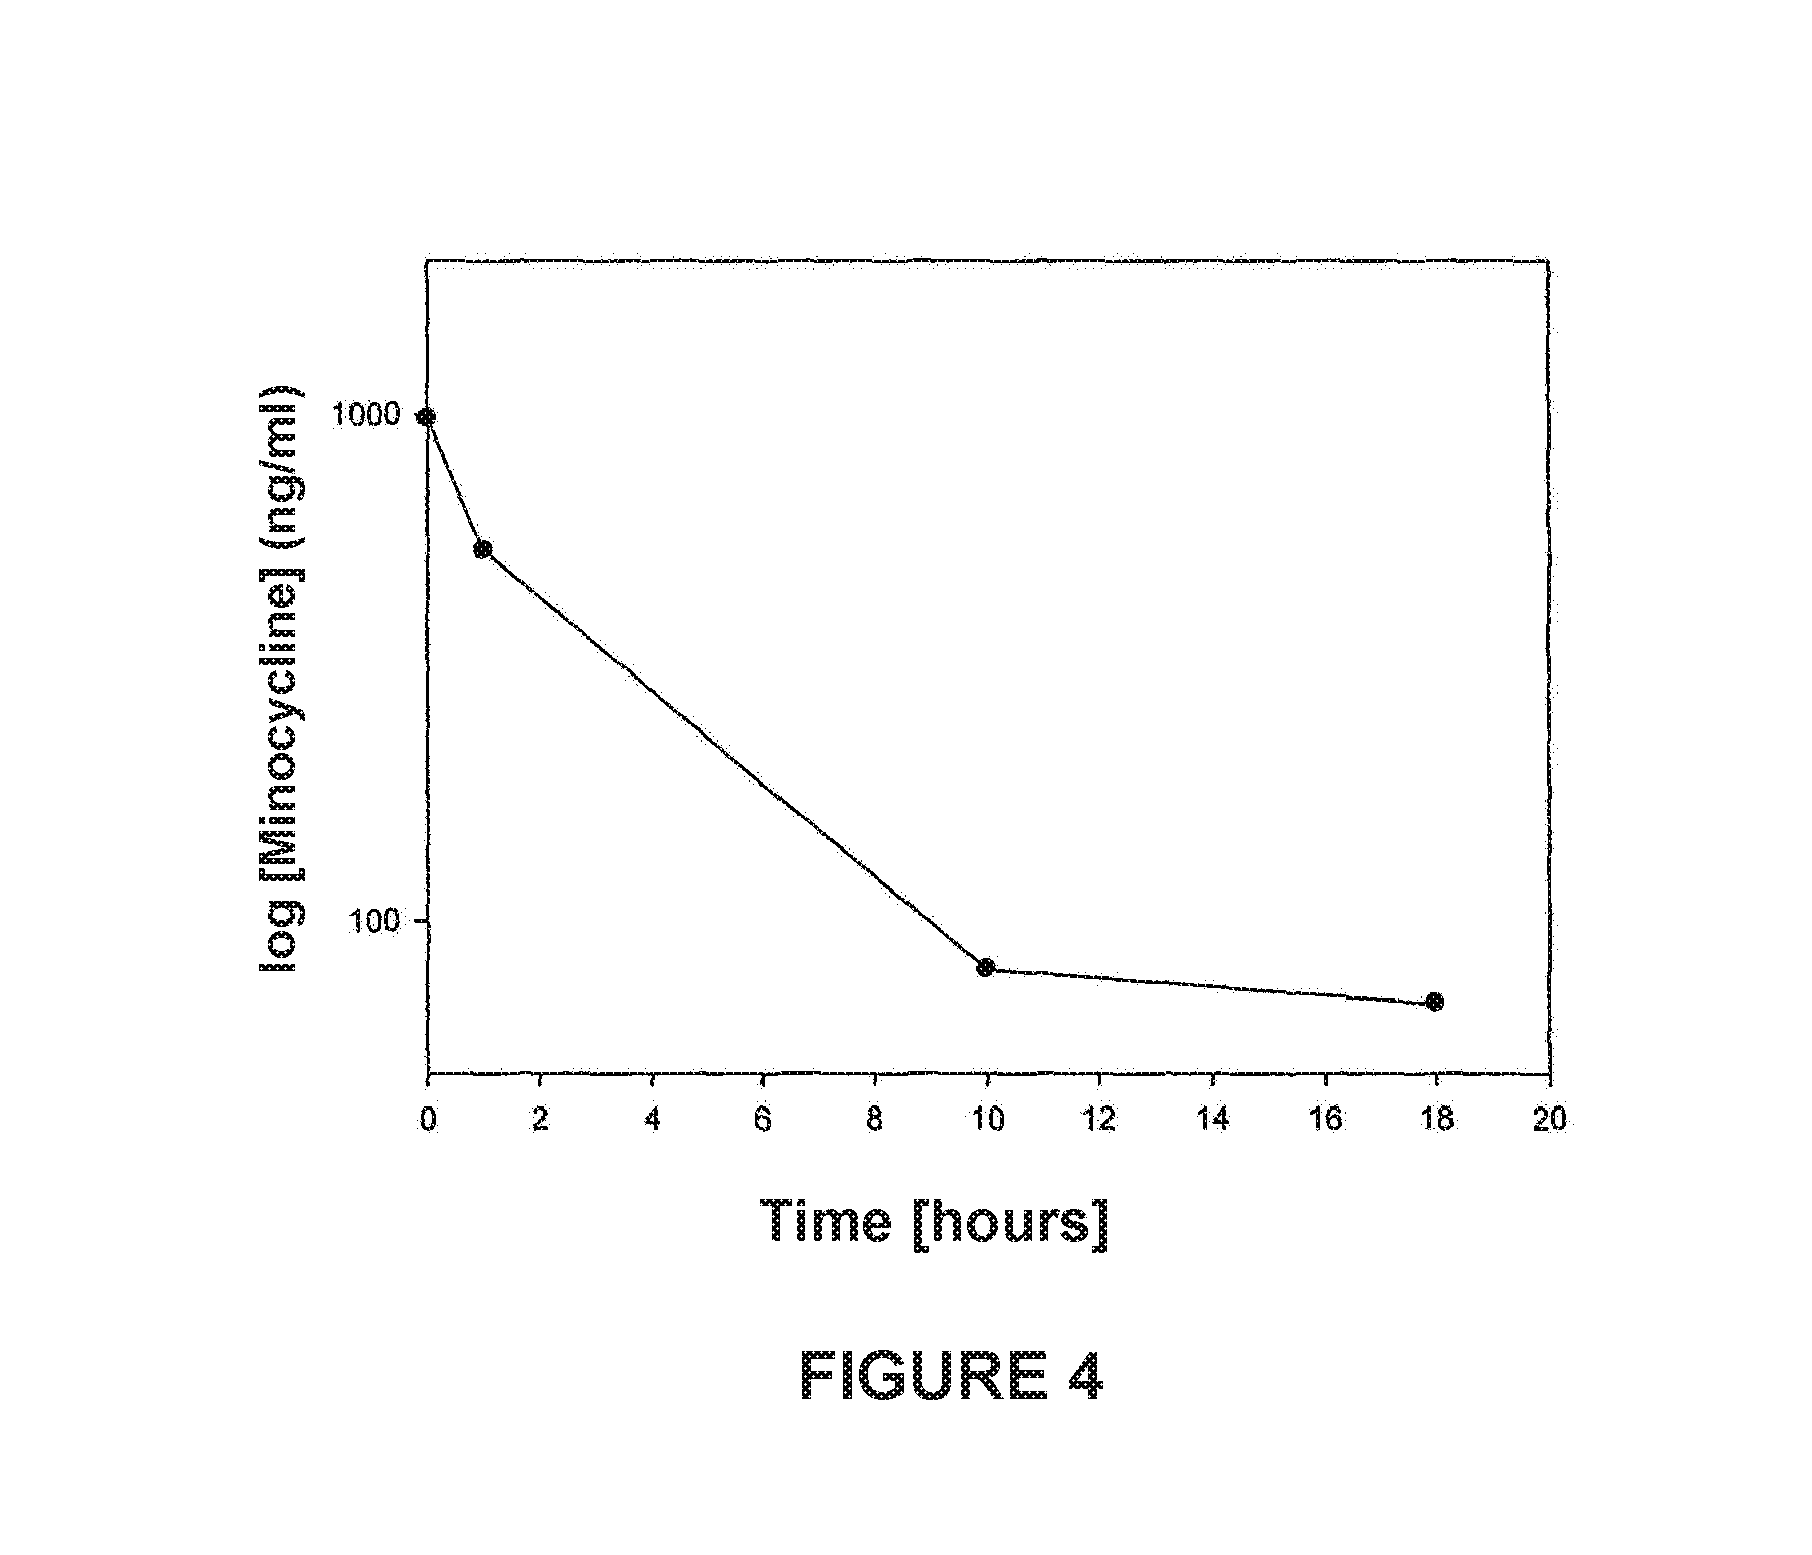 Method for the microbiological determination of traces of antibiotics in low volume biological samples